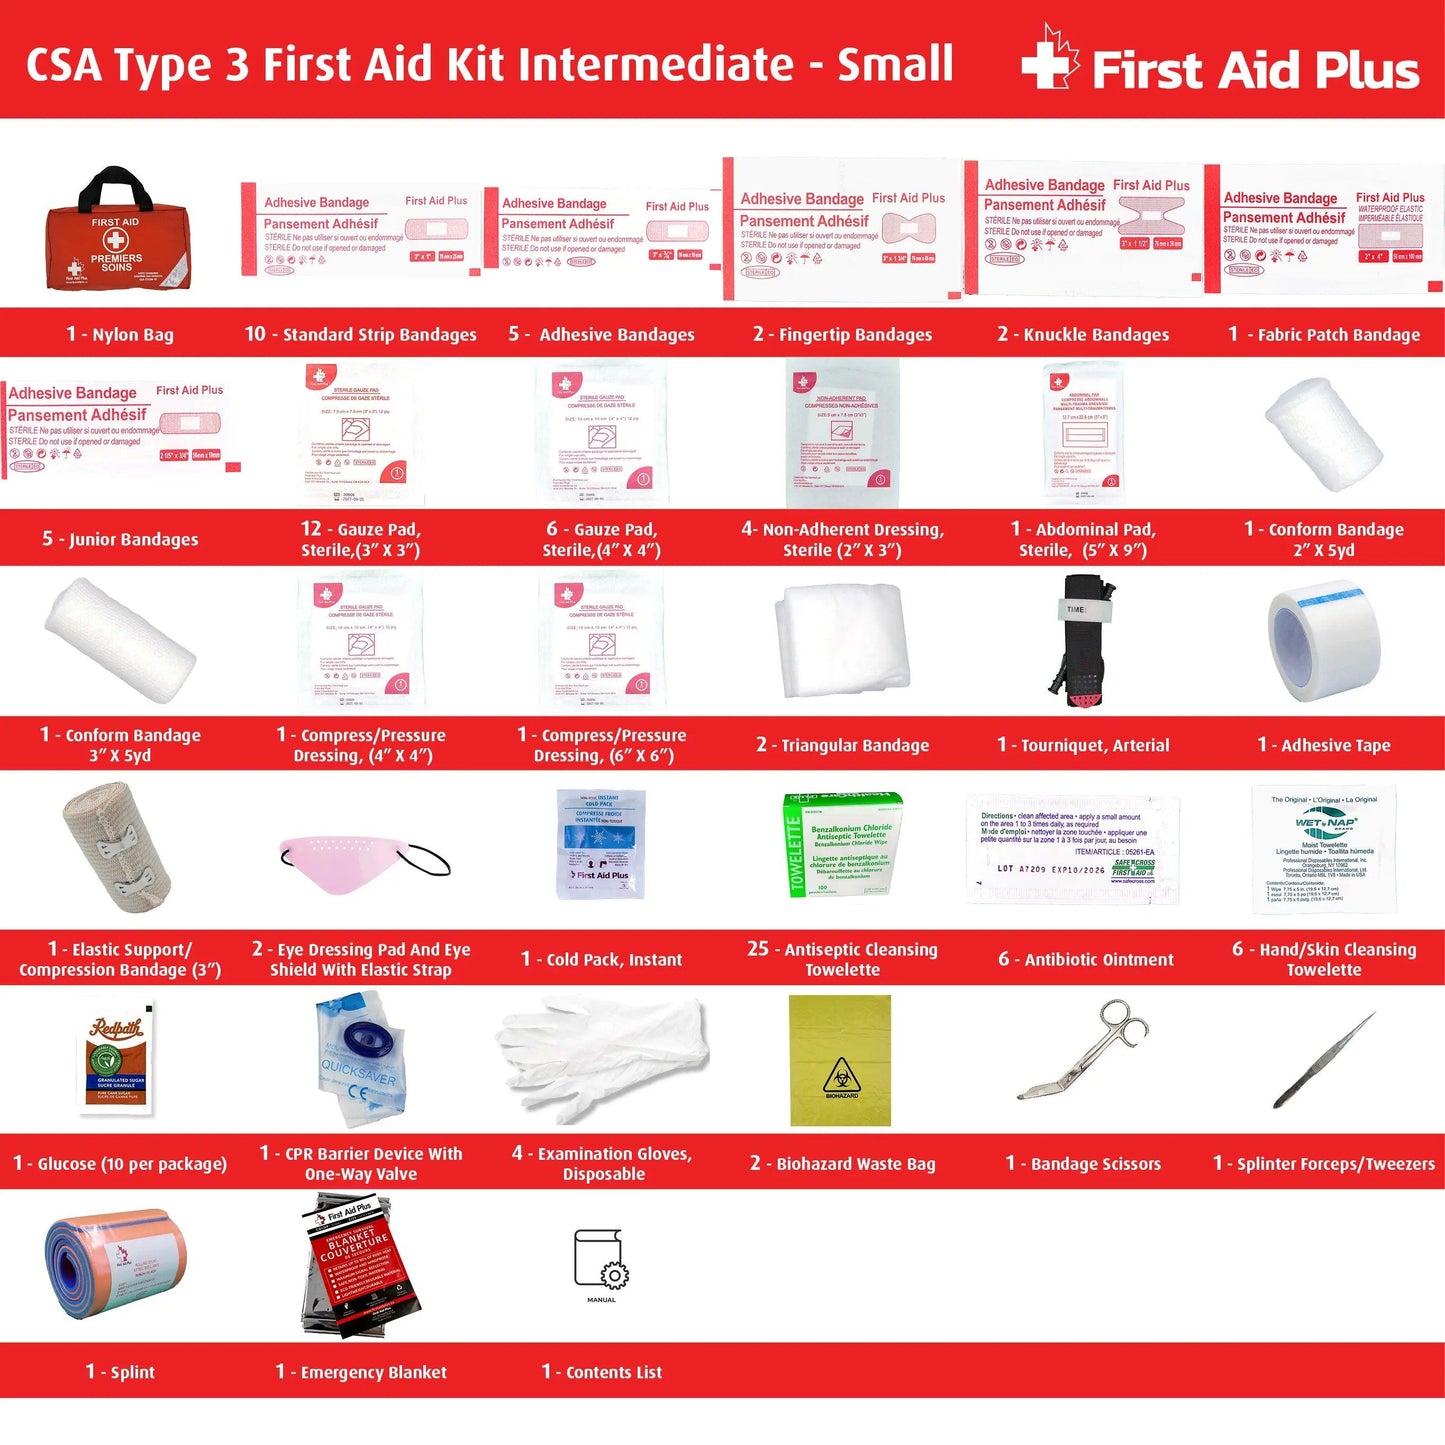 CSA First Aid Kit Type 3 Intermediate - Small - First Aid Plus